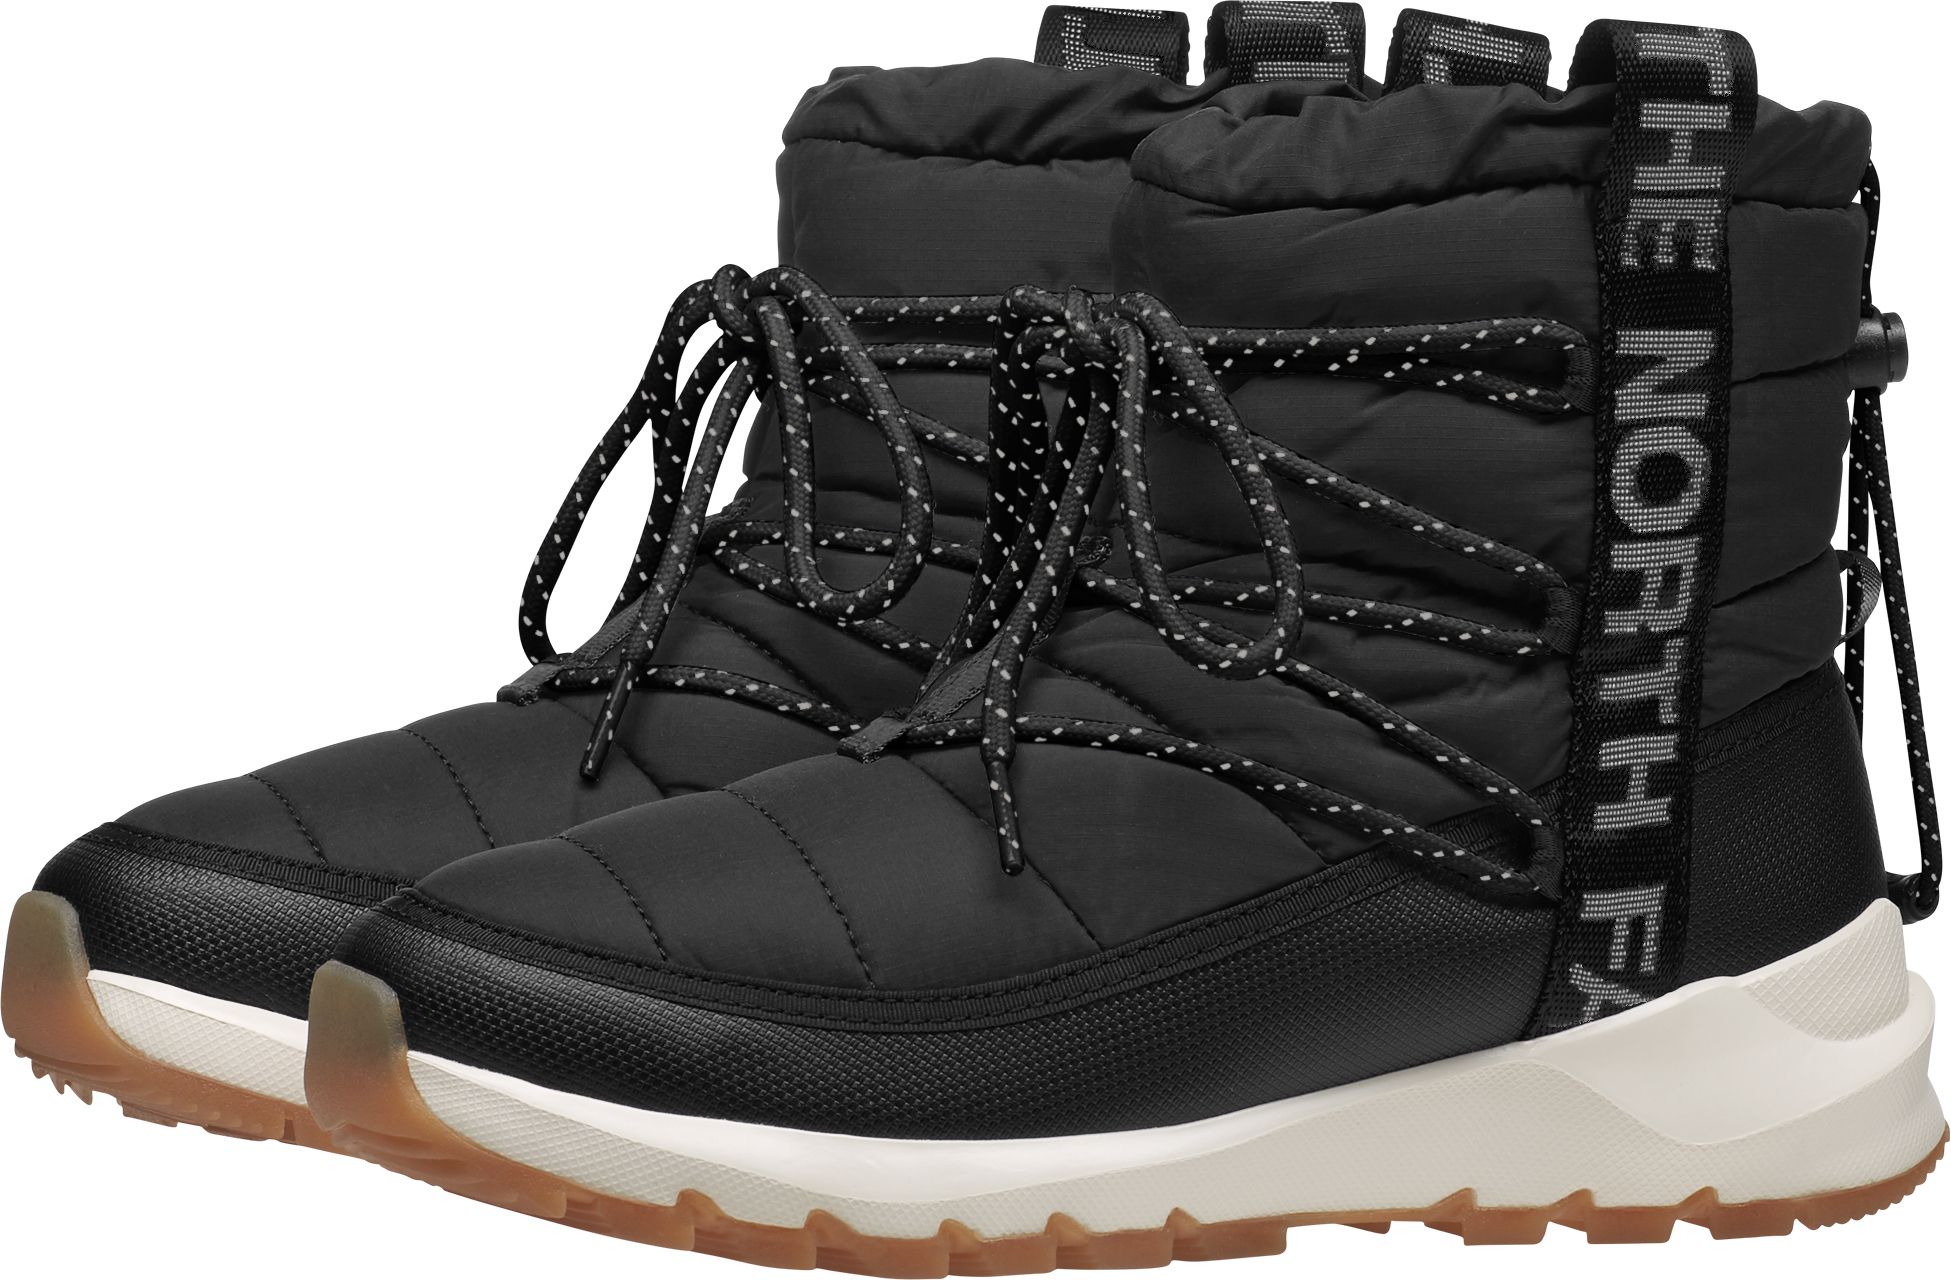 north face winter boots sale